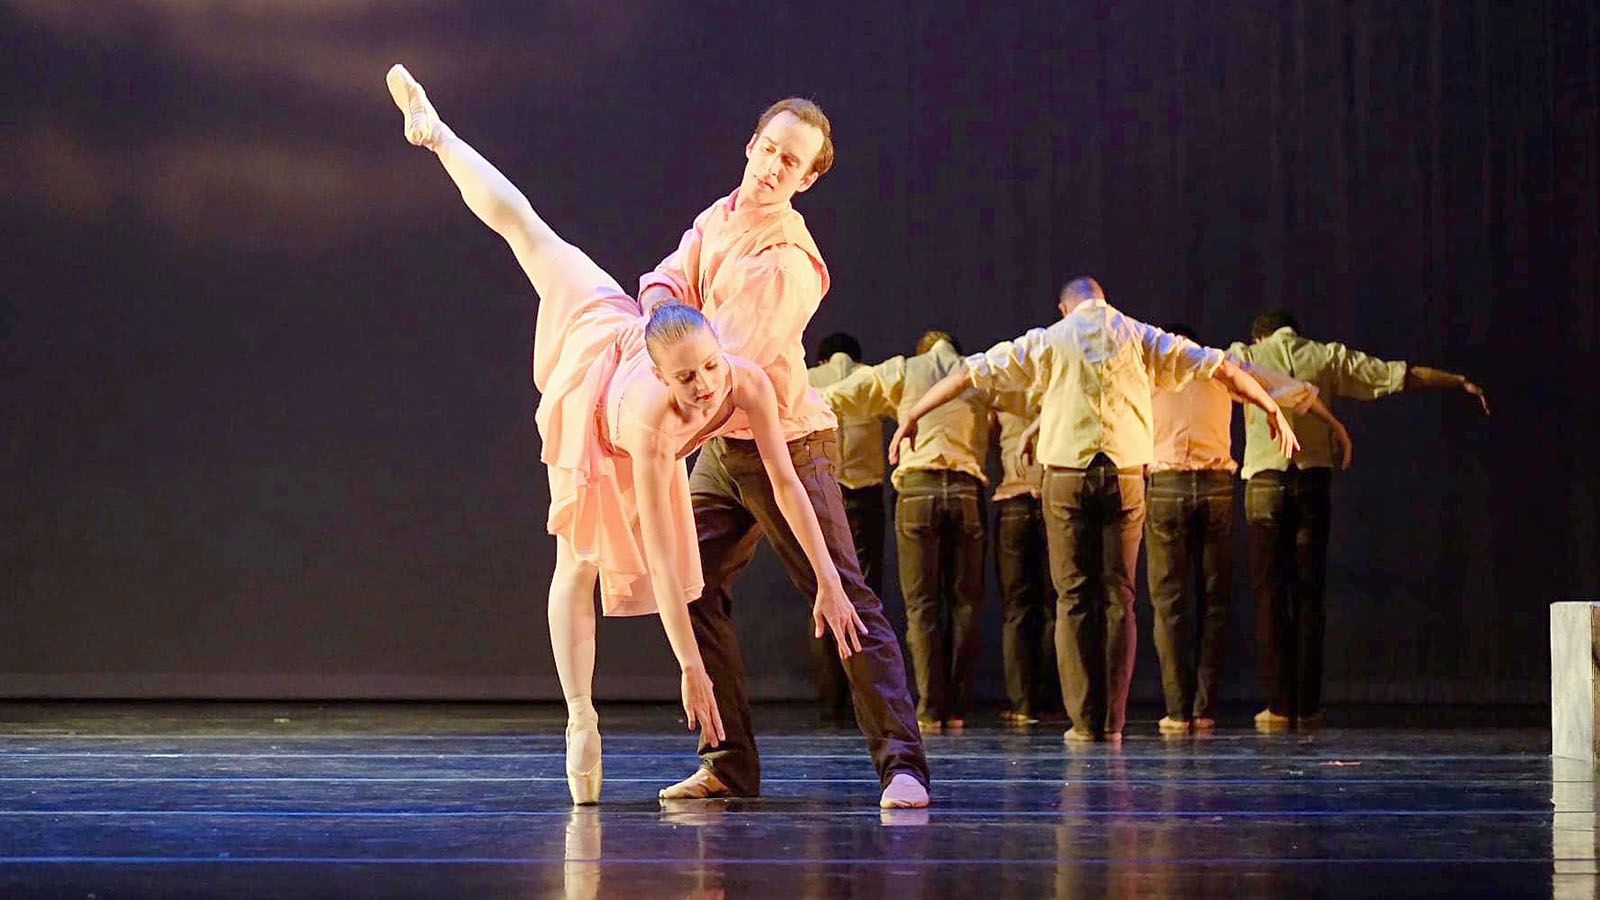 Fort Wayne Ballet will pay tribute to Edward Stierle with shows on Friday-Saturday, MAy 19-20.